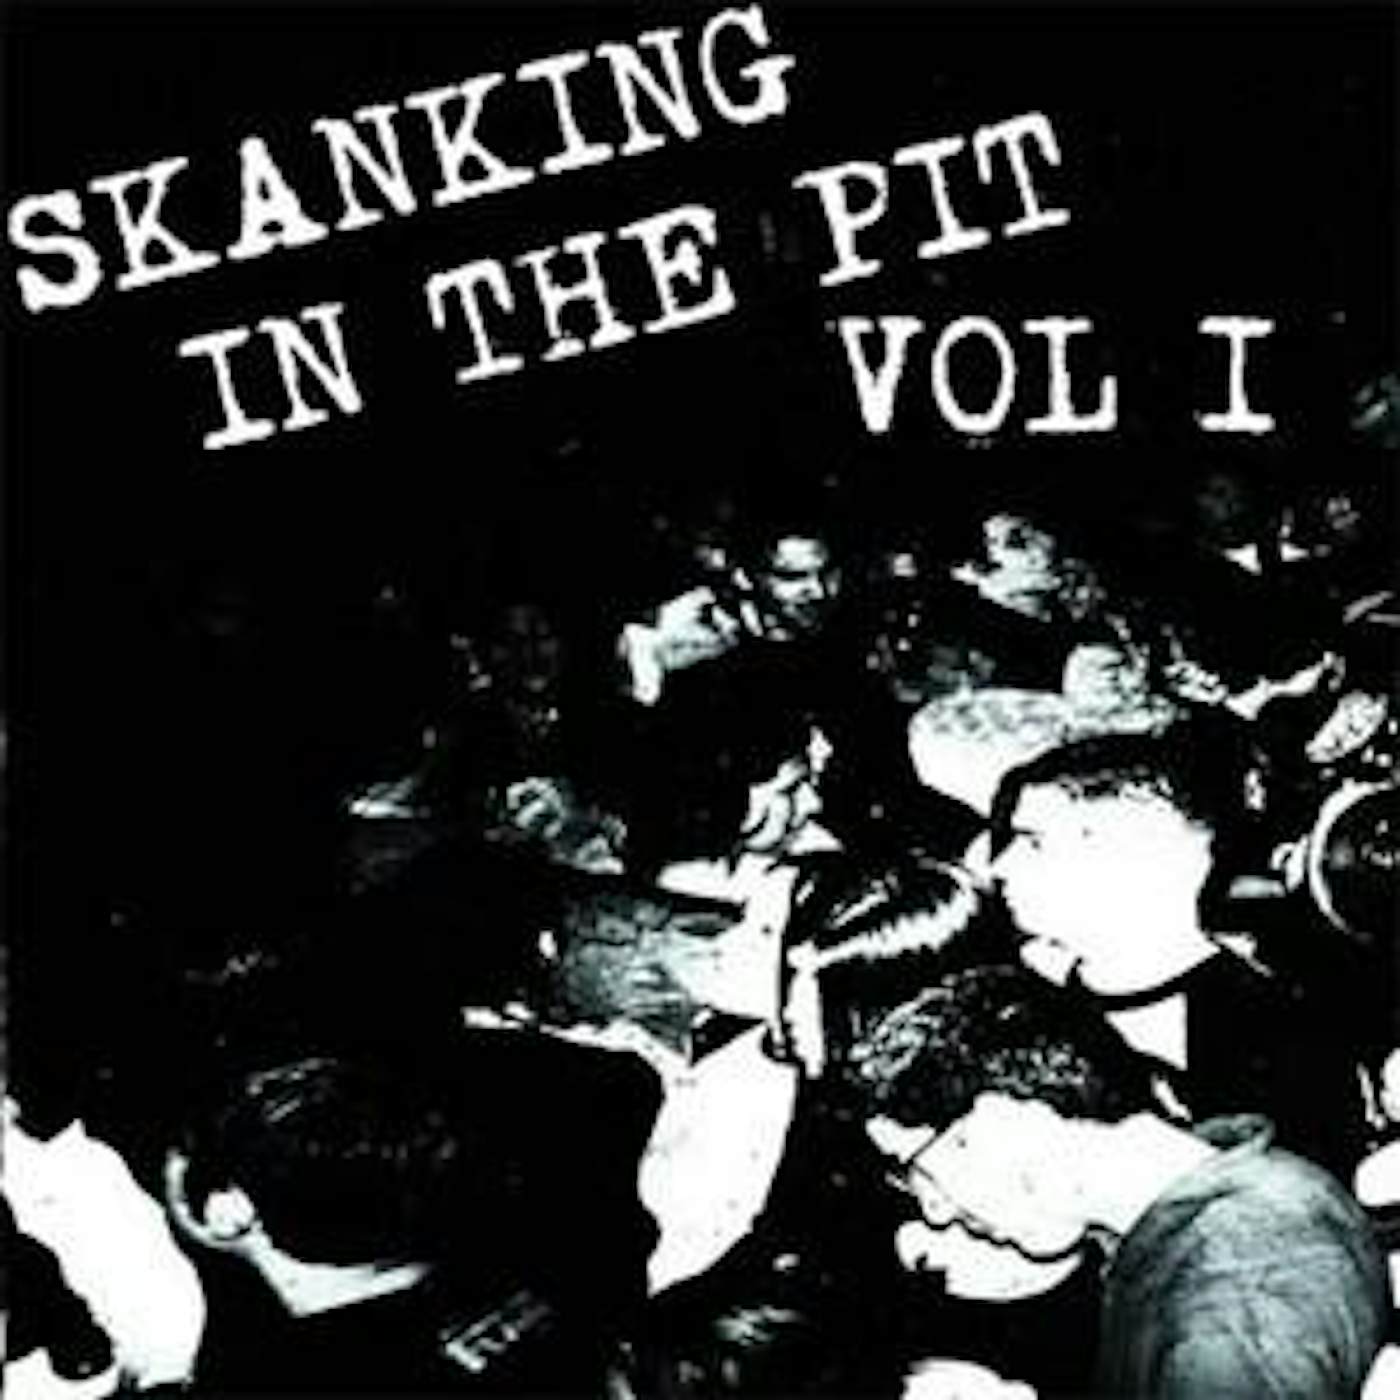 Road Dog Merch Skanking In the Pit Compilation CD